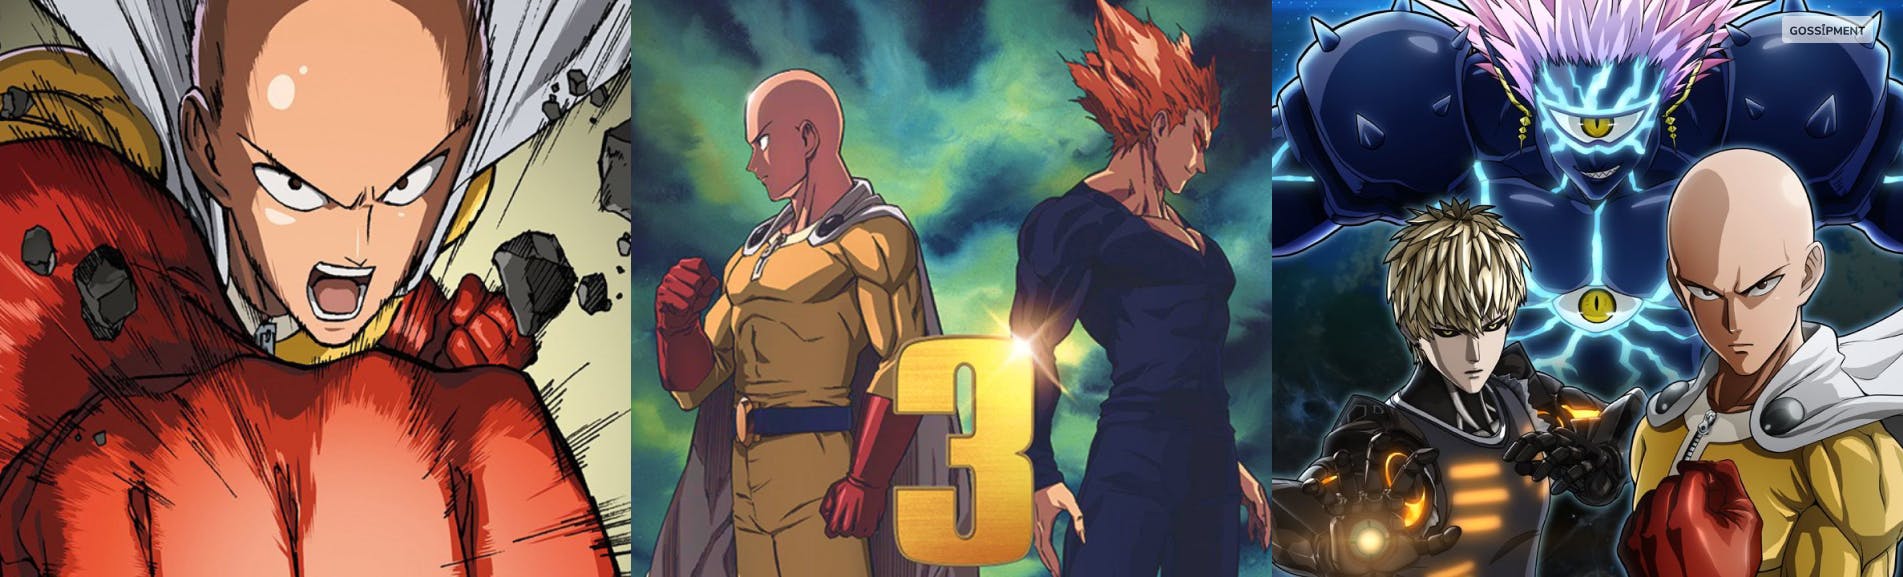 Cover Image for The Countdown Begins: One Punch Man Season 3 Release Date Announcement